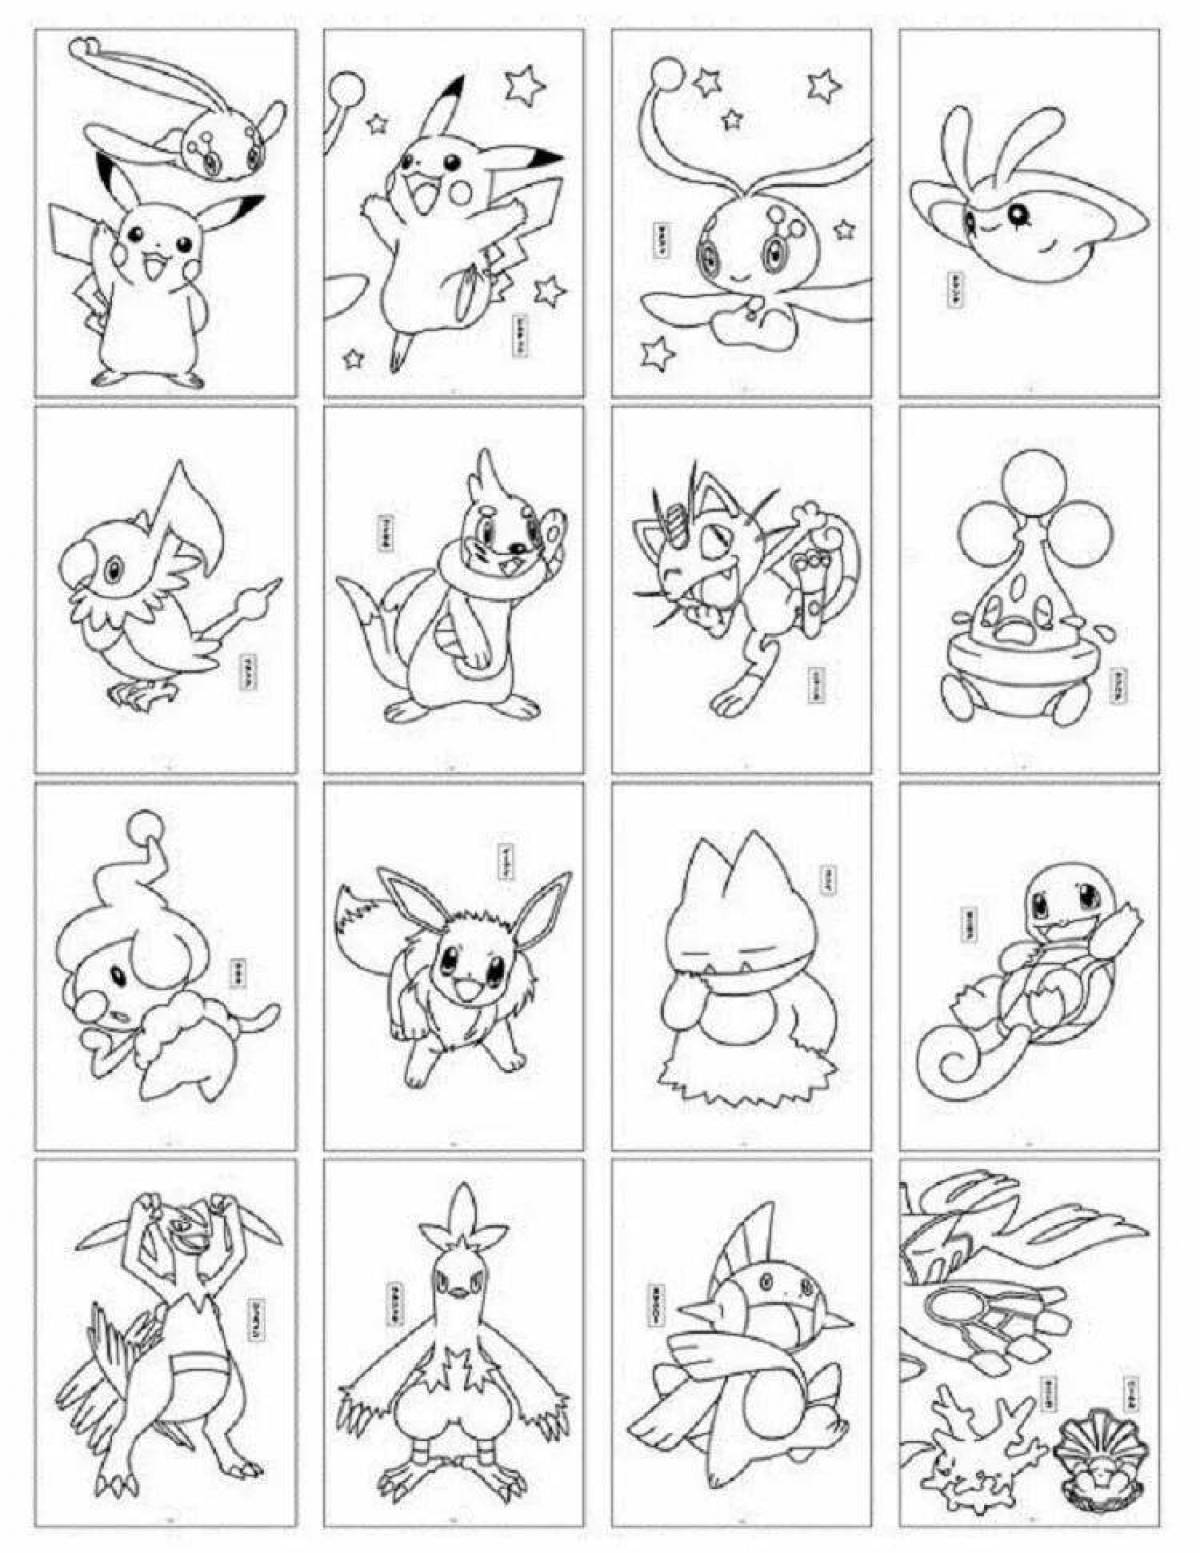 Creative coloring pages